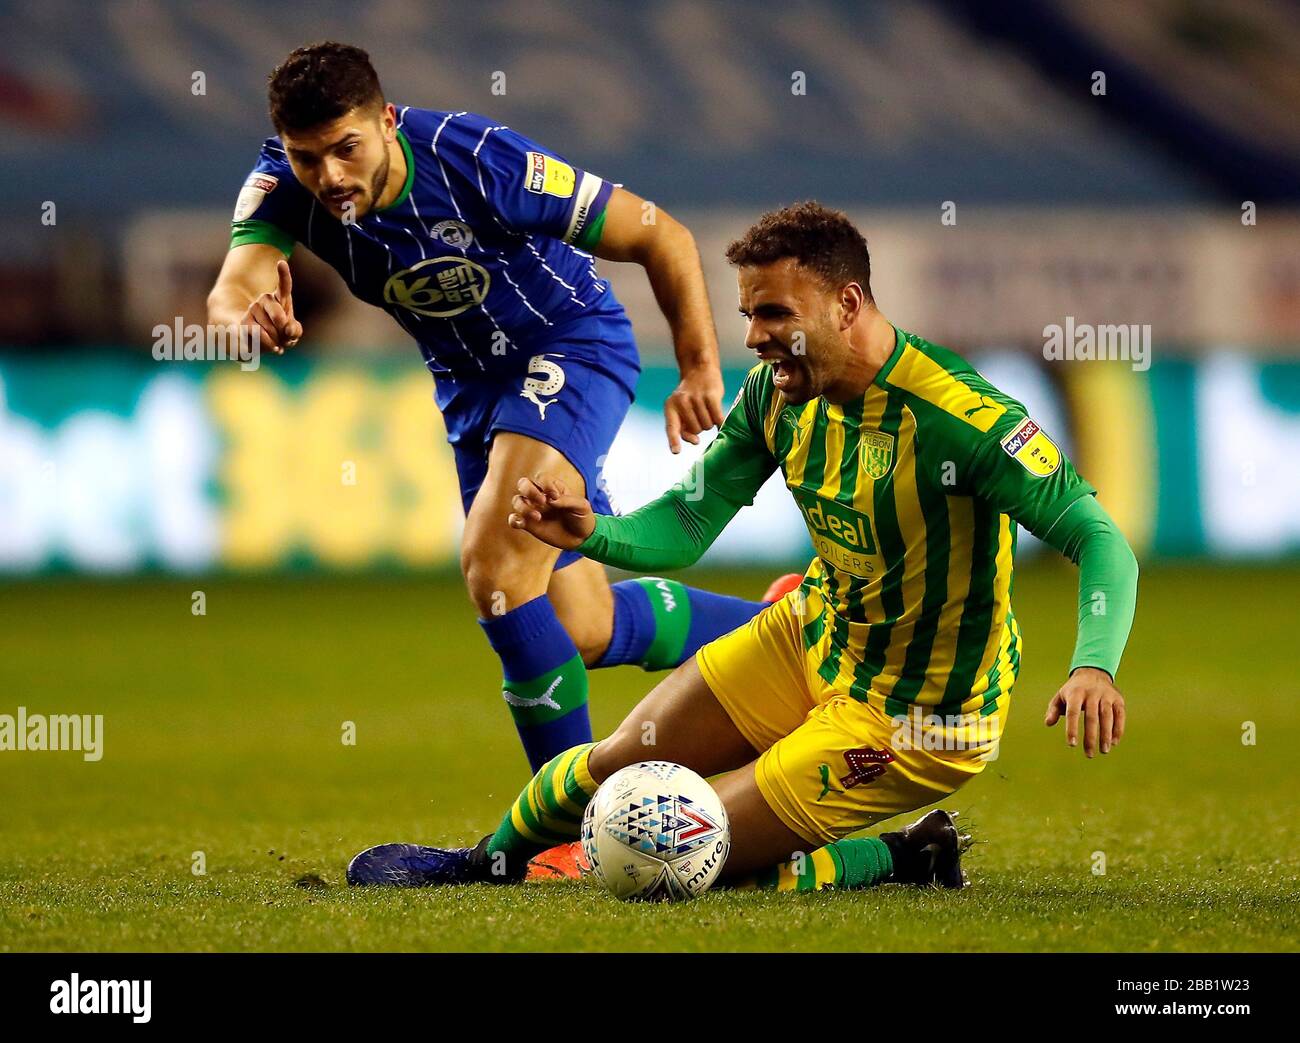 Wigan Athletic's Sam Morsy (left) and West Bromwich Albion's Hal Robson-Kanu battle for the ball during the Sky Bet Championship match at the DW Stadium, Wigan. PA Photo. Picture date: Wednesday December 11, 2019. See PA story SOCCER Swansea. Photo credit should read: Martin Rickett/PA Wire. RESTRICTIONS: EDITORIAL USE ONLY No use with unauthorised audio, video, data, fixture lists, club/league logos or 'live' services. Online in-match use limited to 120 images, no video emulation. No use in betting, games or single club/league/player publications. Stock Photo